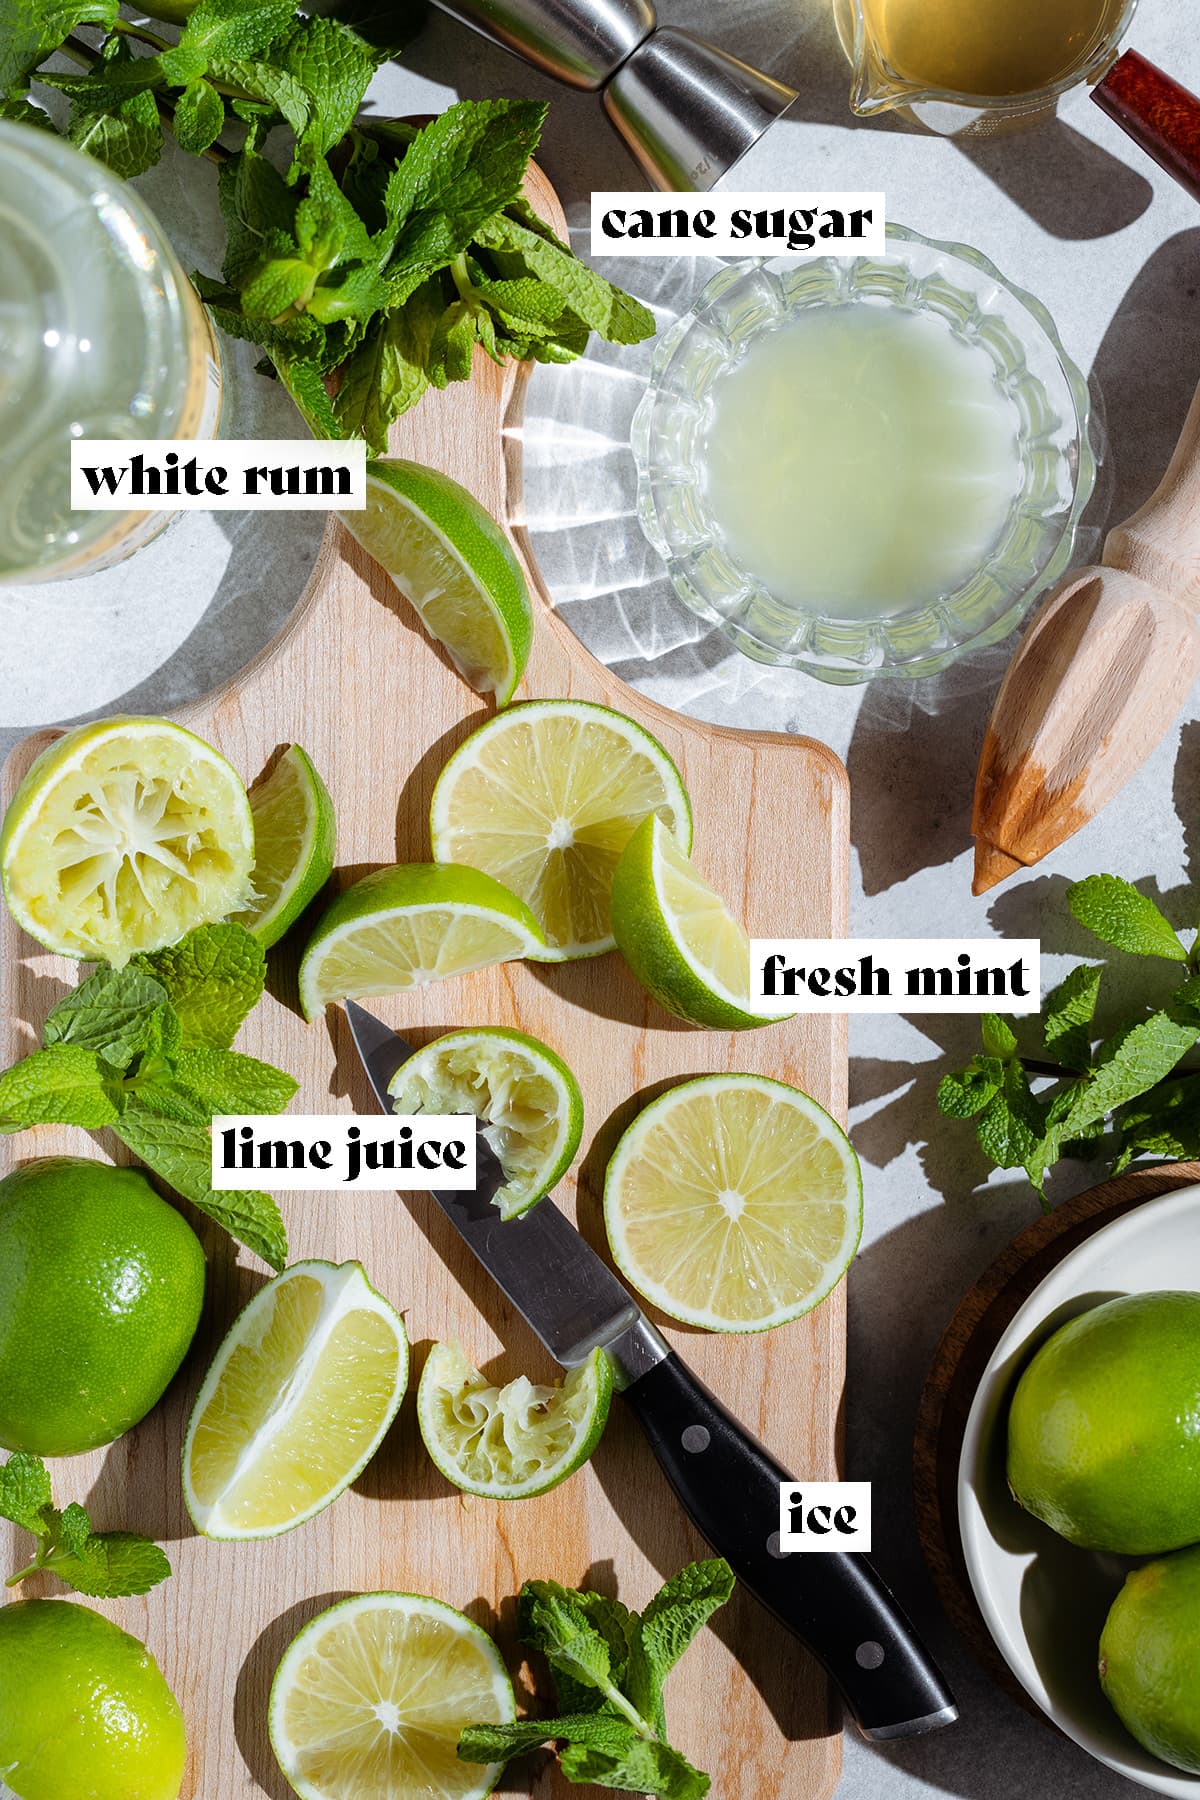 Wedges and slices of lime on a wooden cutting board with fresh mint and other mojito ingredients around the board.